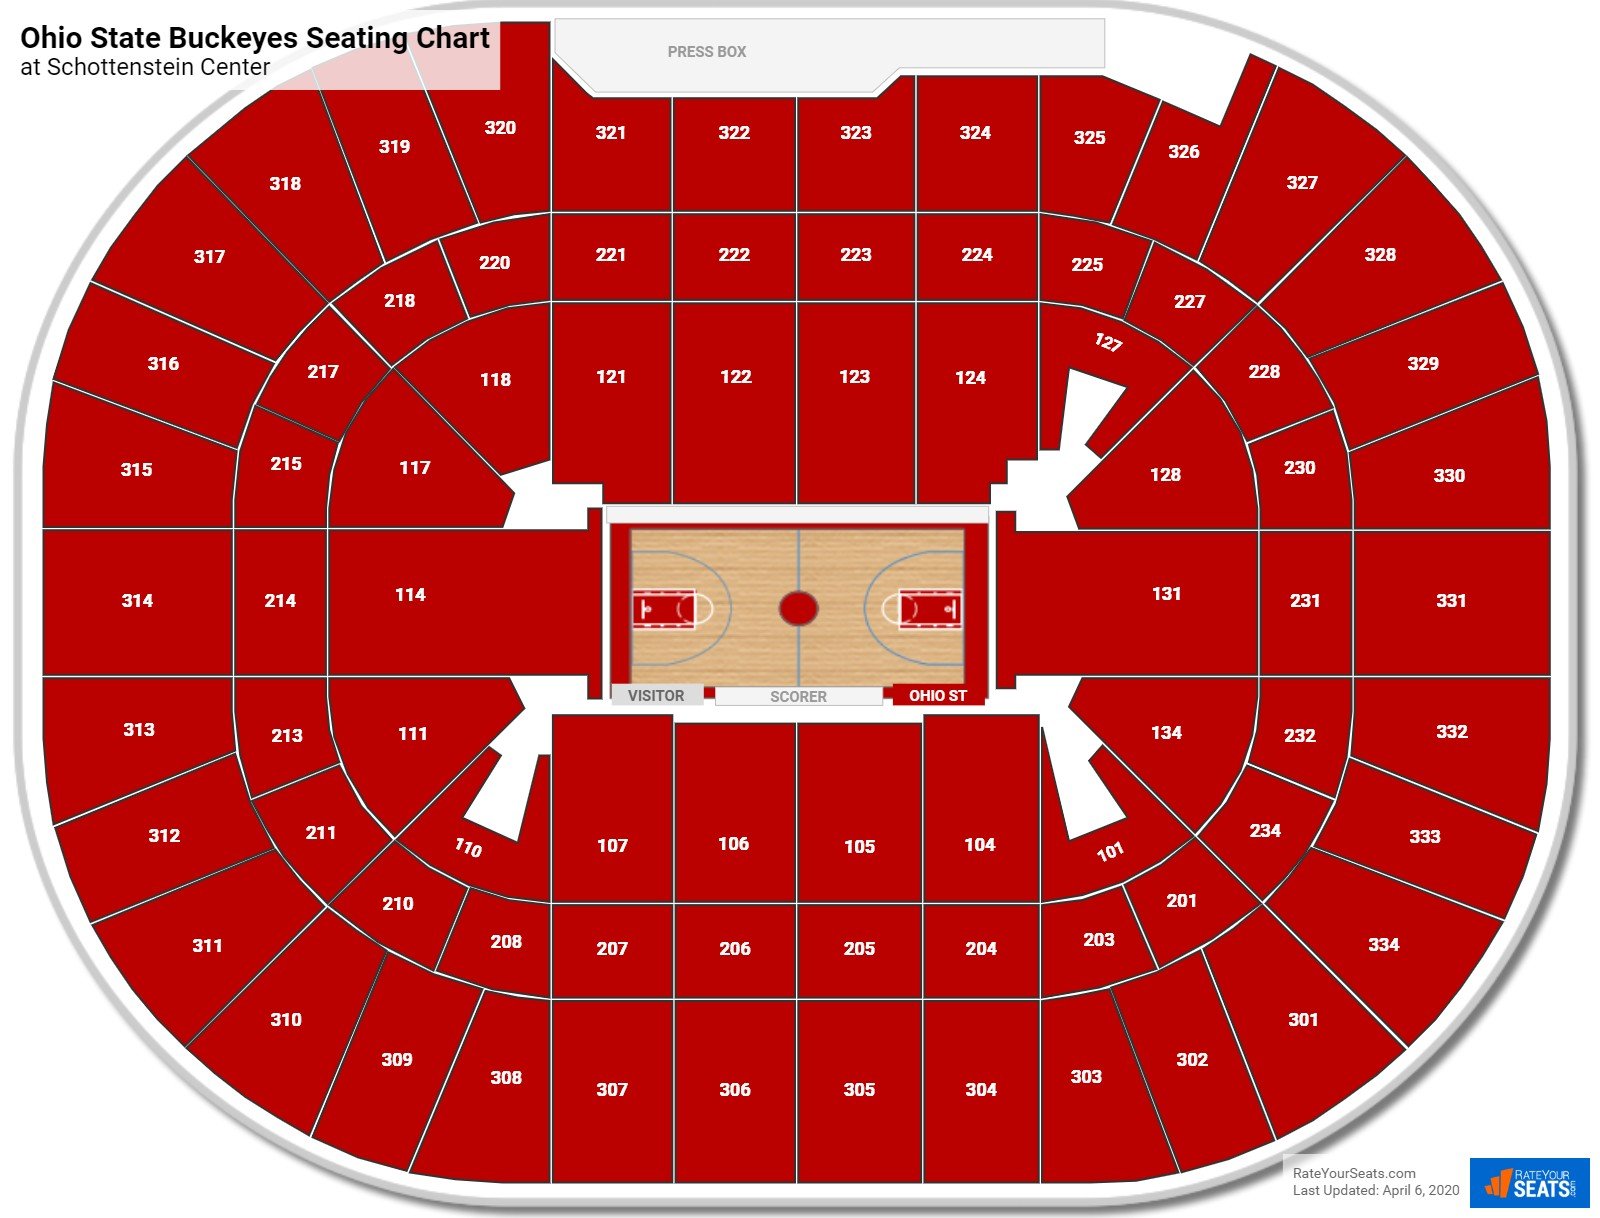 Schottenstein Center Seating Charts for Ohio State Basketball ...